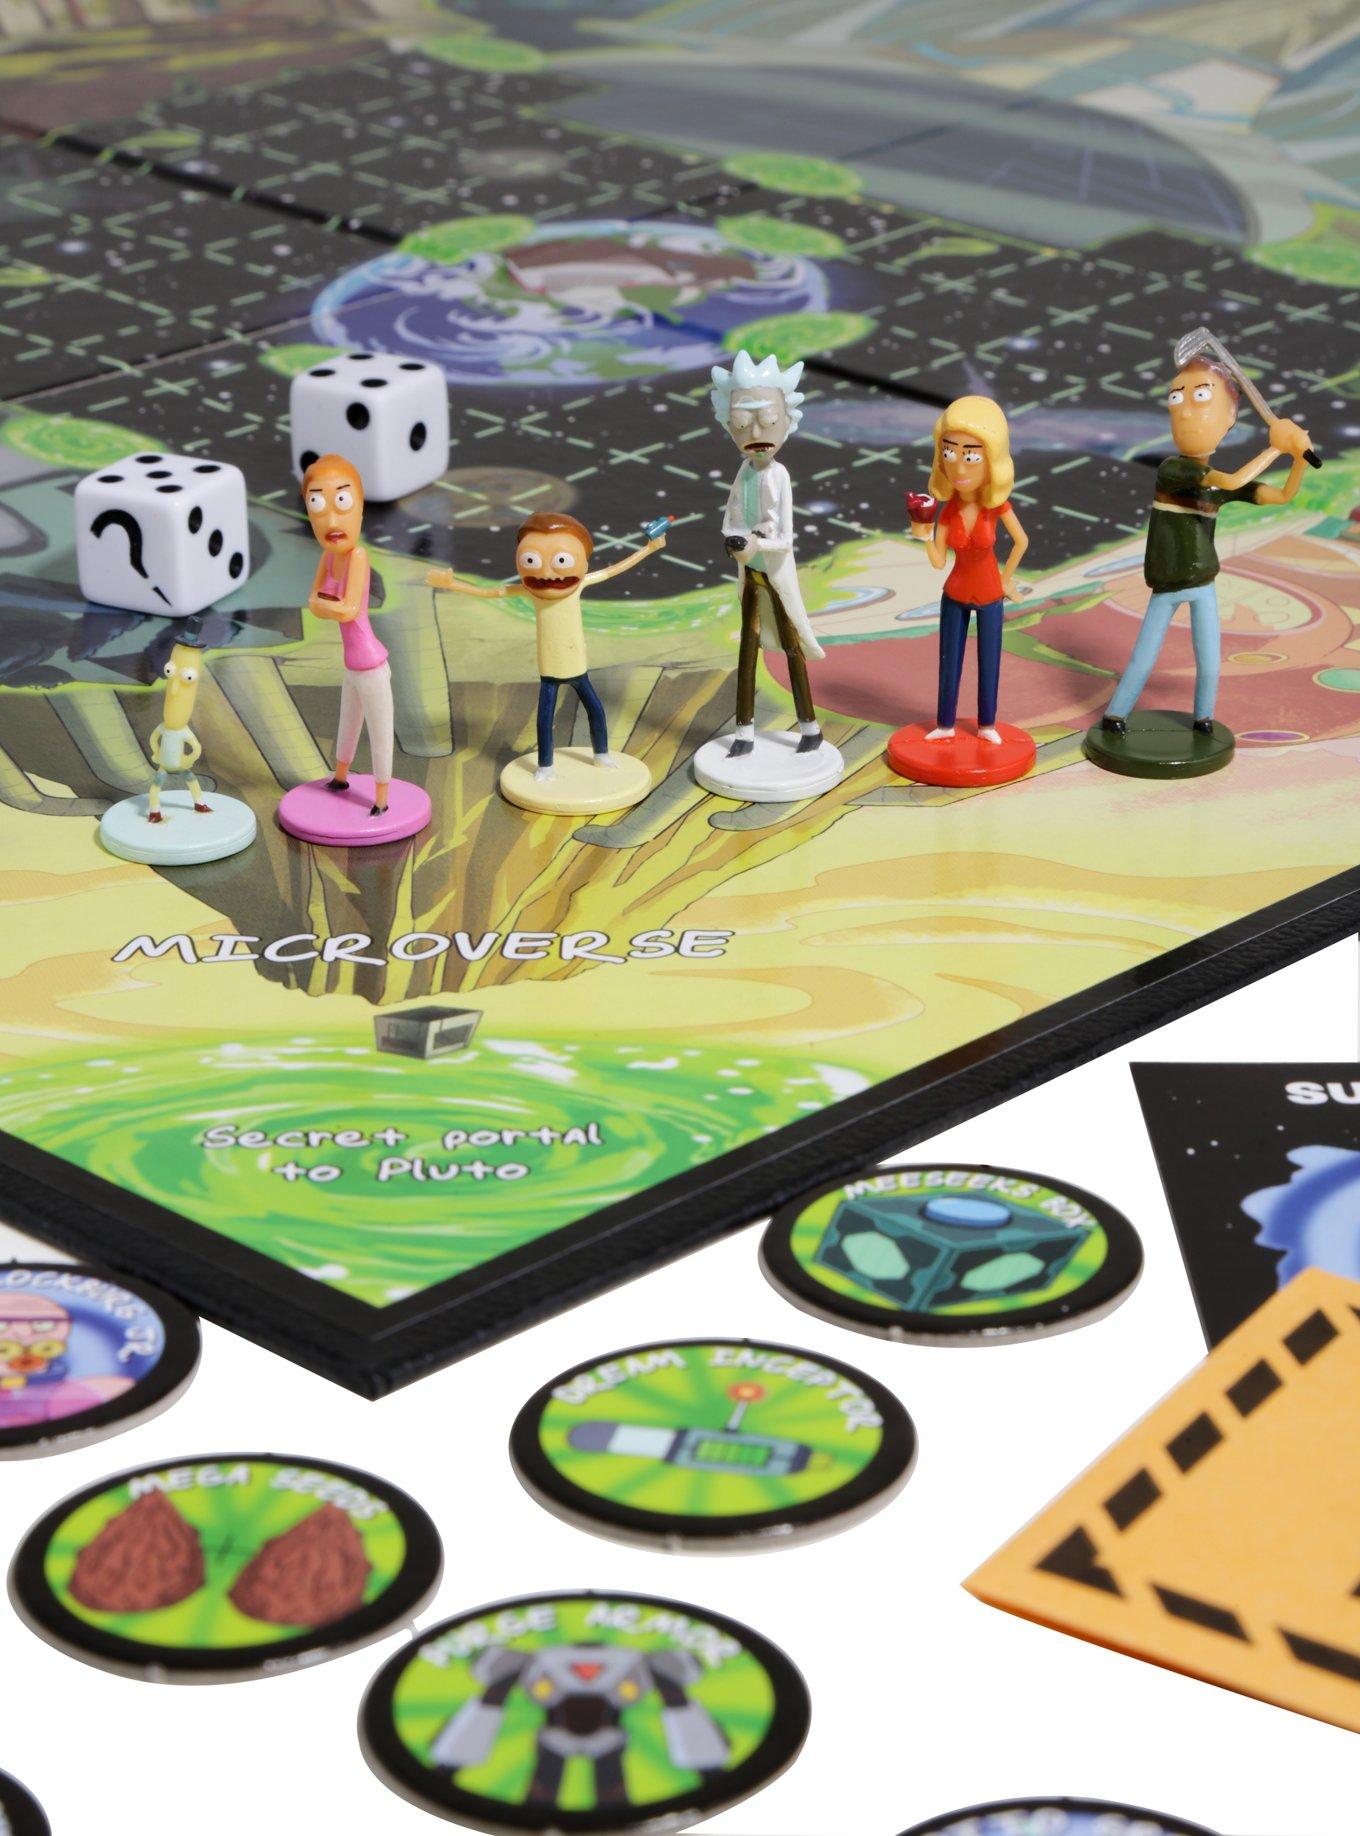 Clue: Rick And Morty Edition Board Game, , alternate